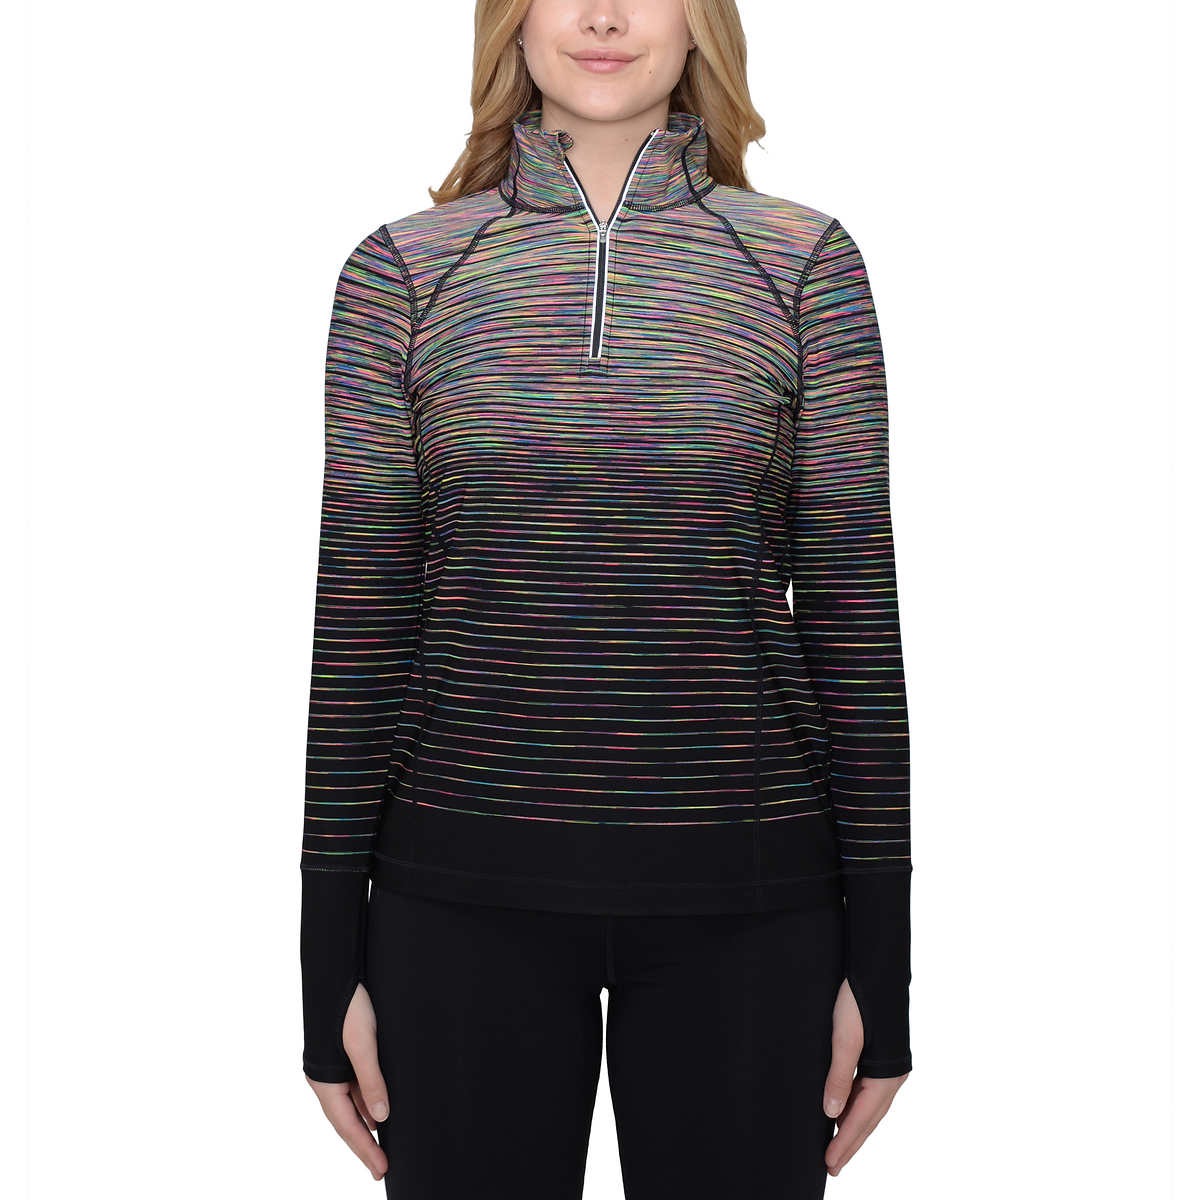 Costco Active Pullover {Best Impulse Buys From Costco}